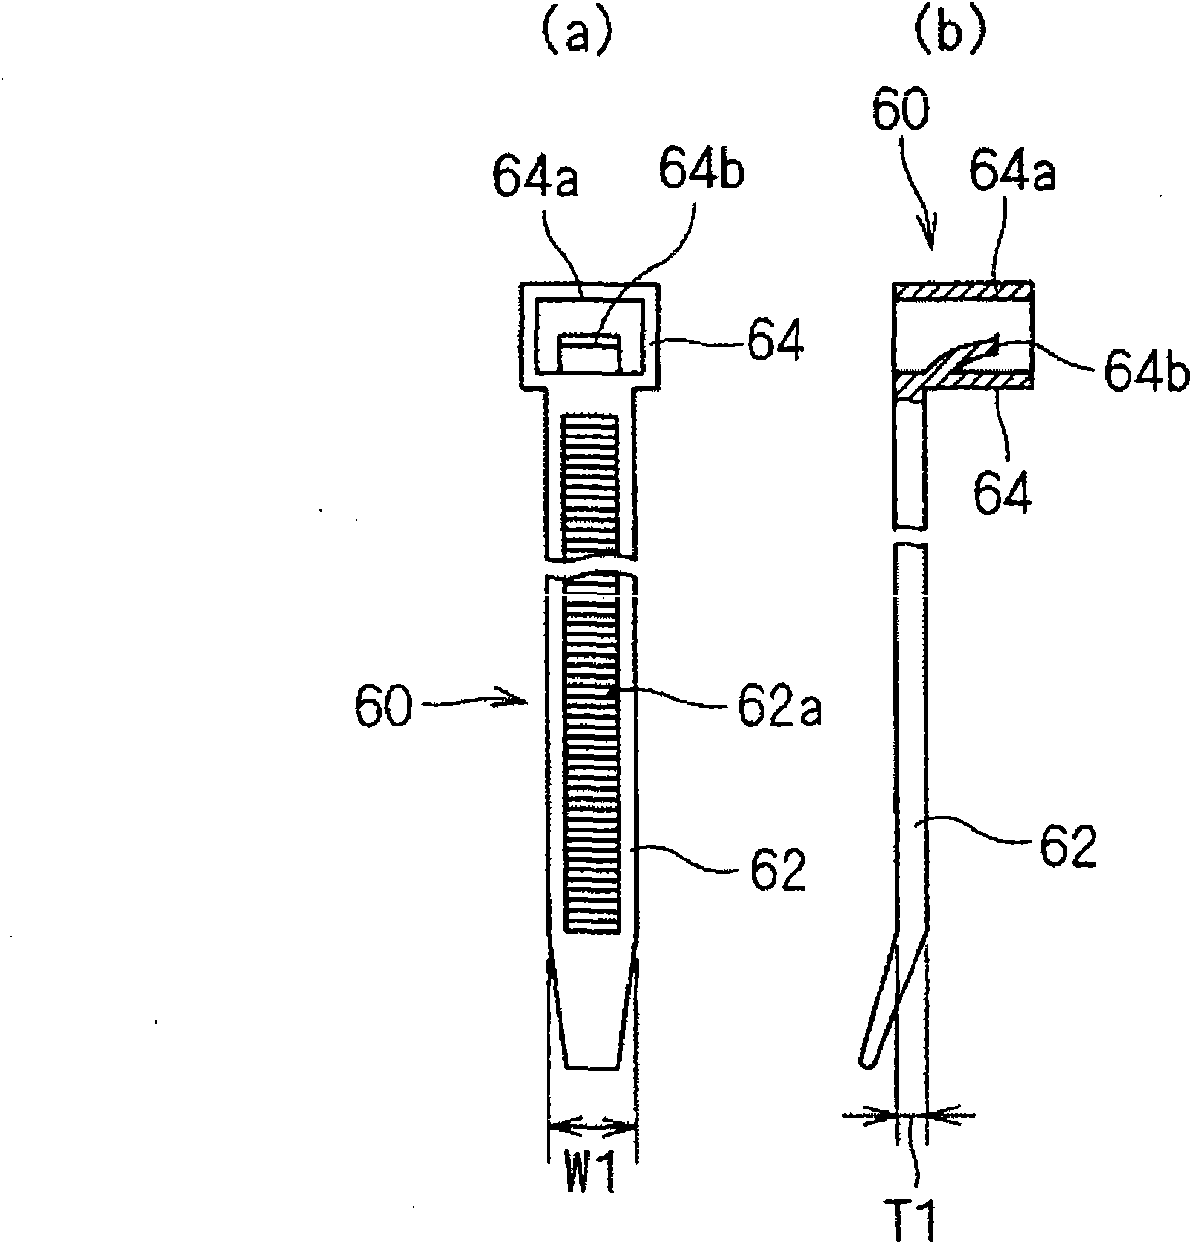 Wire harness fixture, wire harness device with fixture, and method of manufacturing wire harness device with fixture